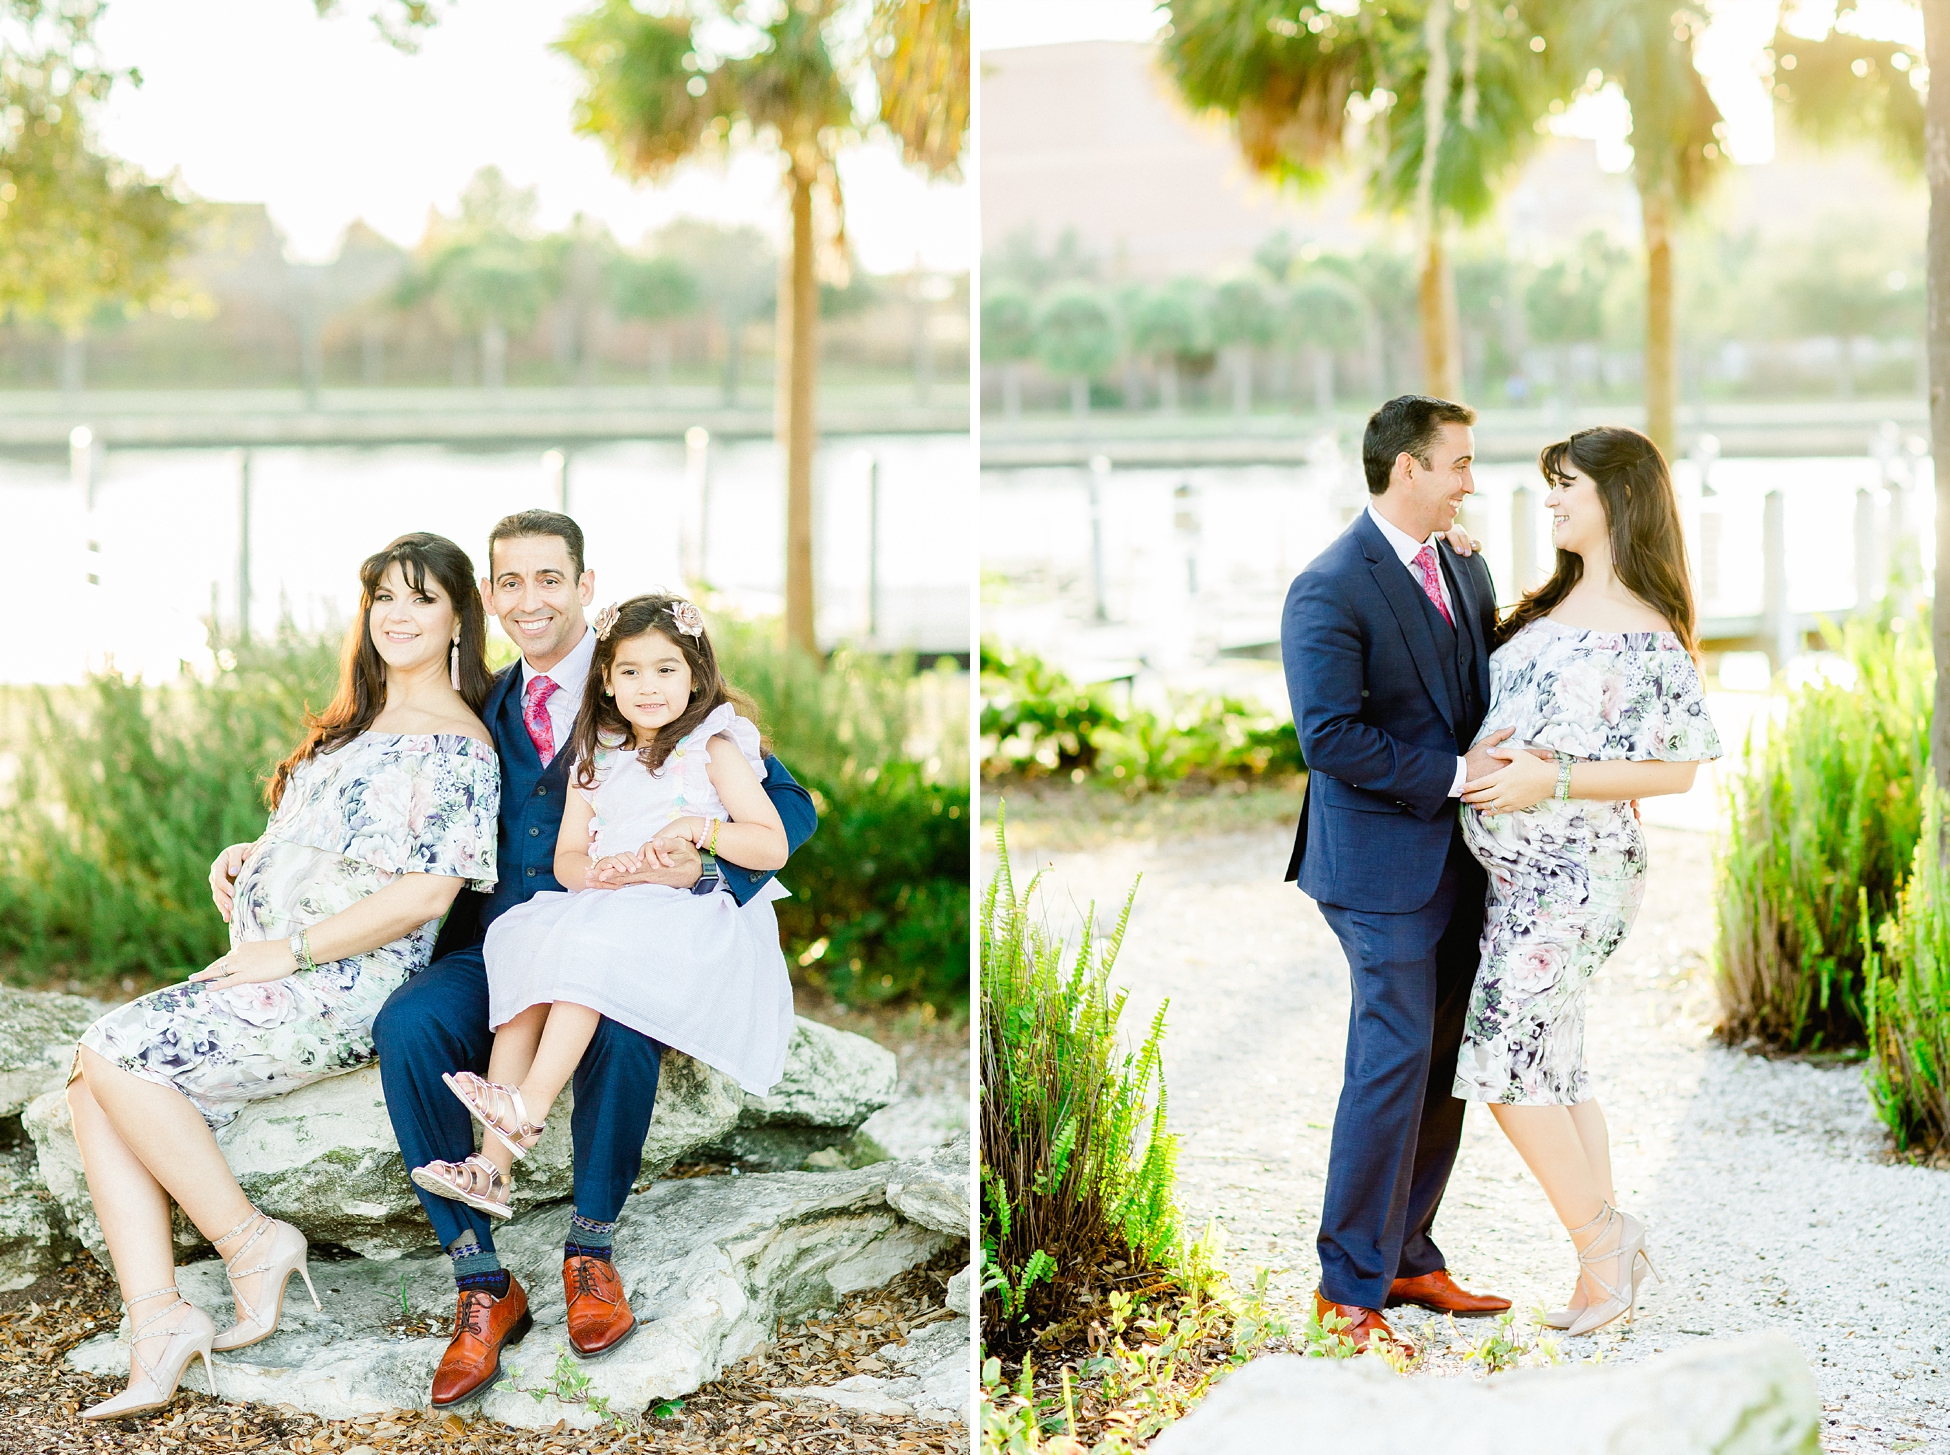 Tampa Maternity | © Ailyn La Torre Photography 2019